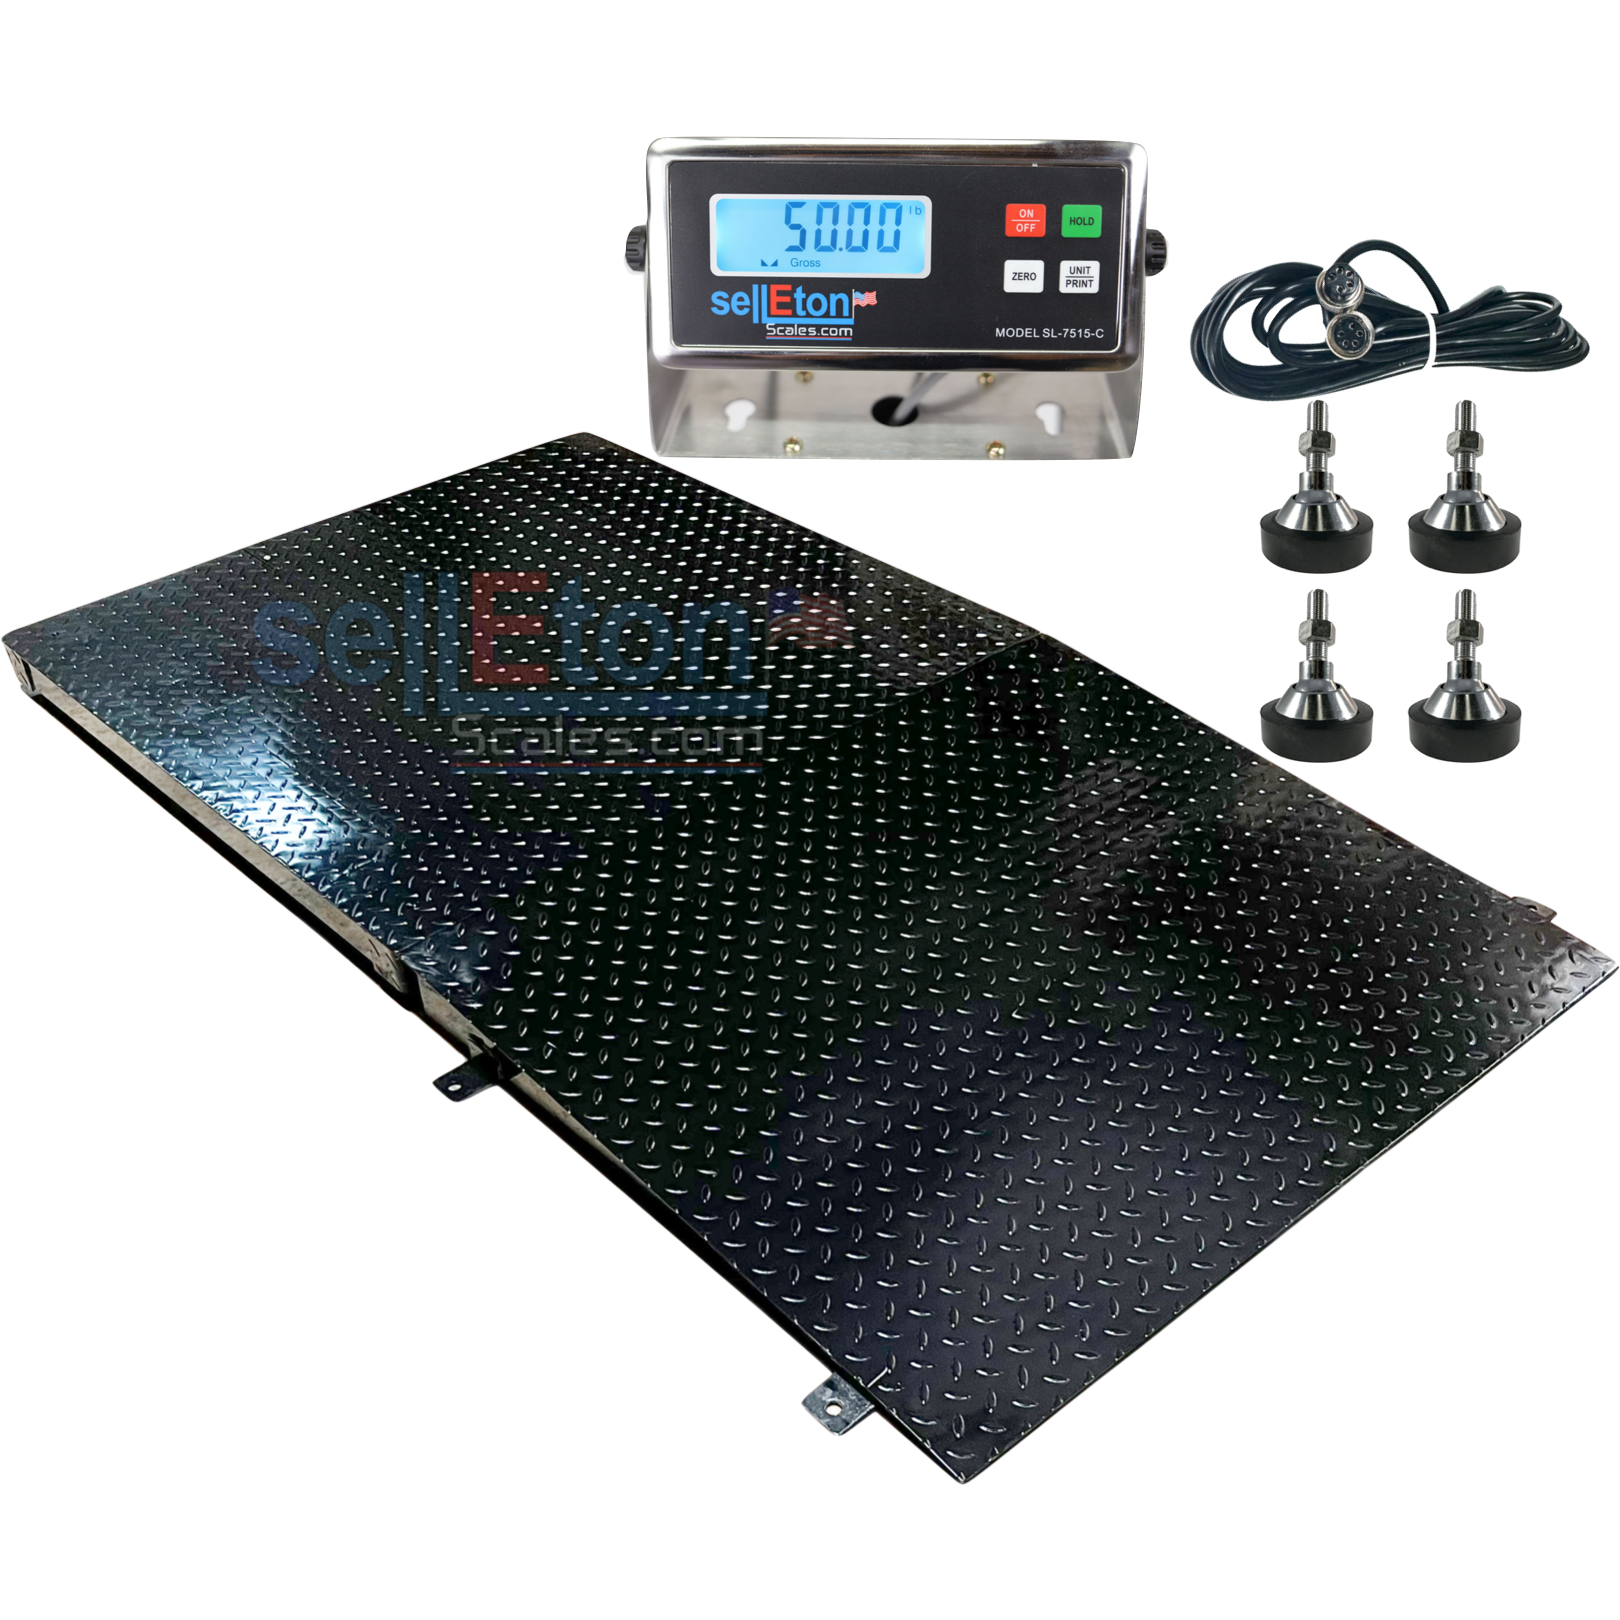 Load Cell Floor Scale Kit Platform Livestock Scale Truck Scale Kit